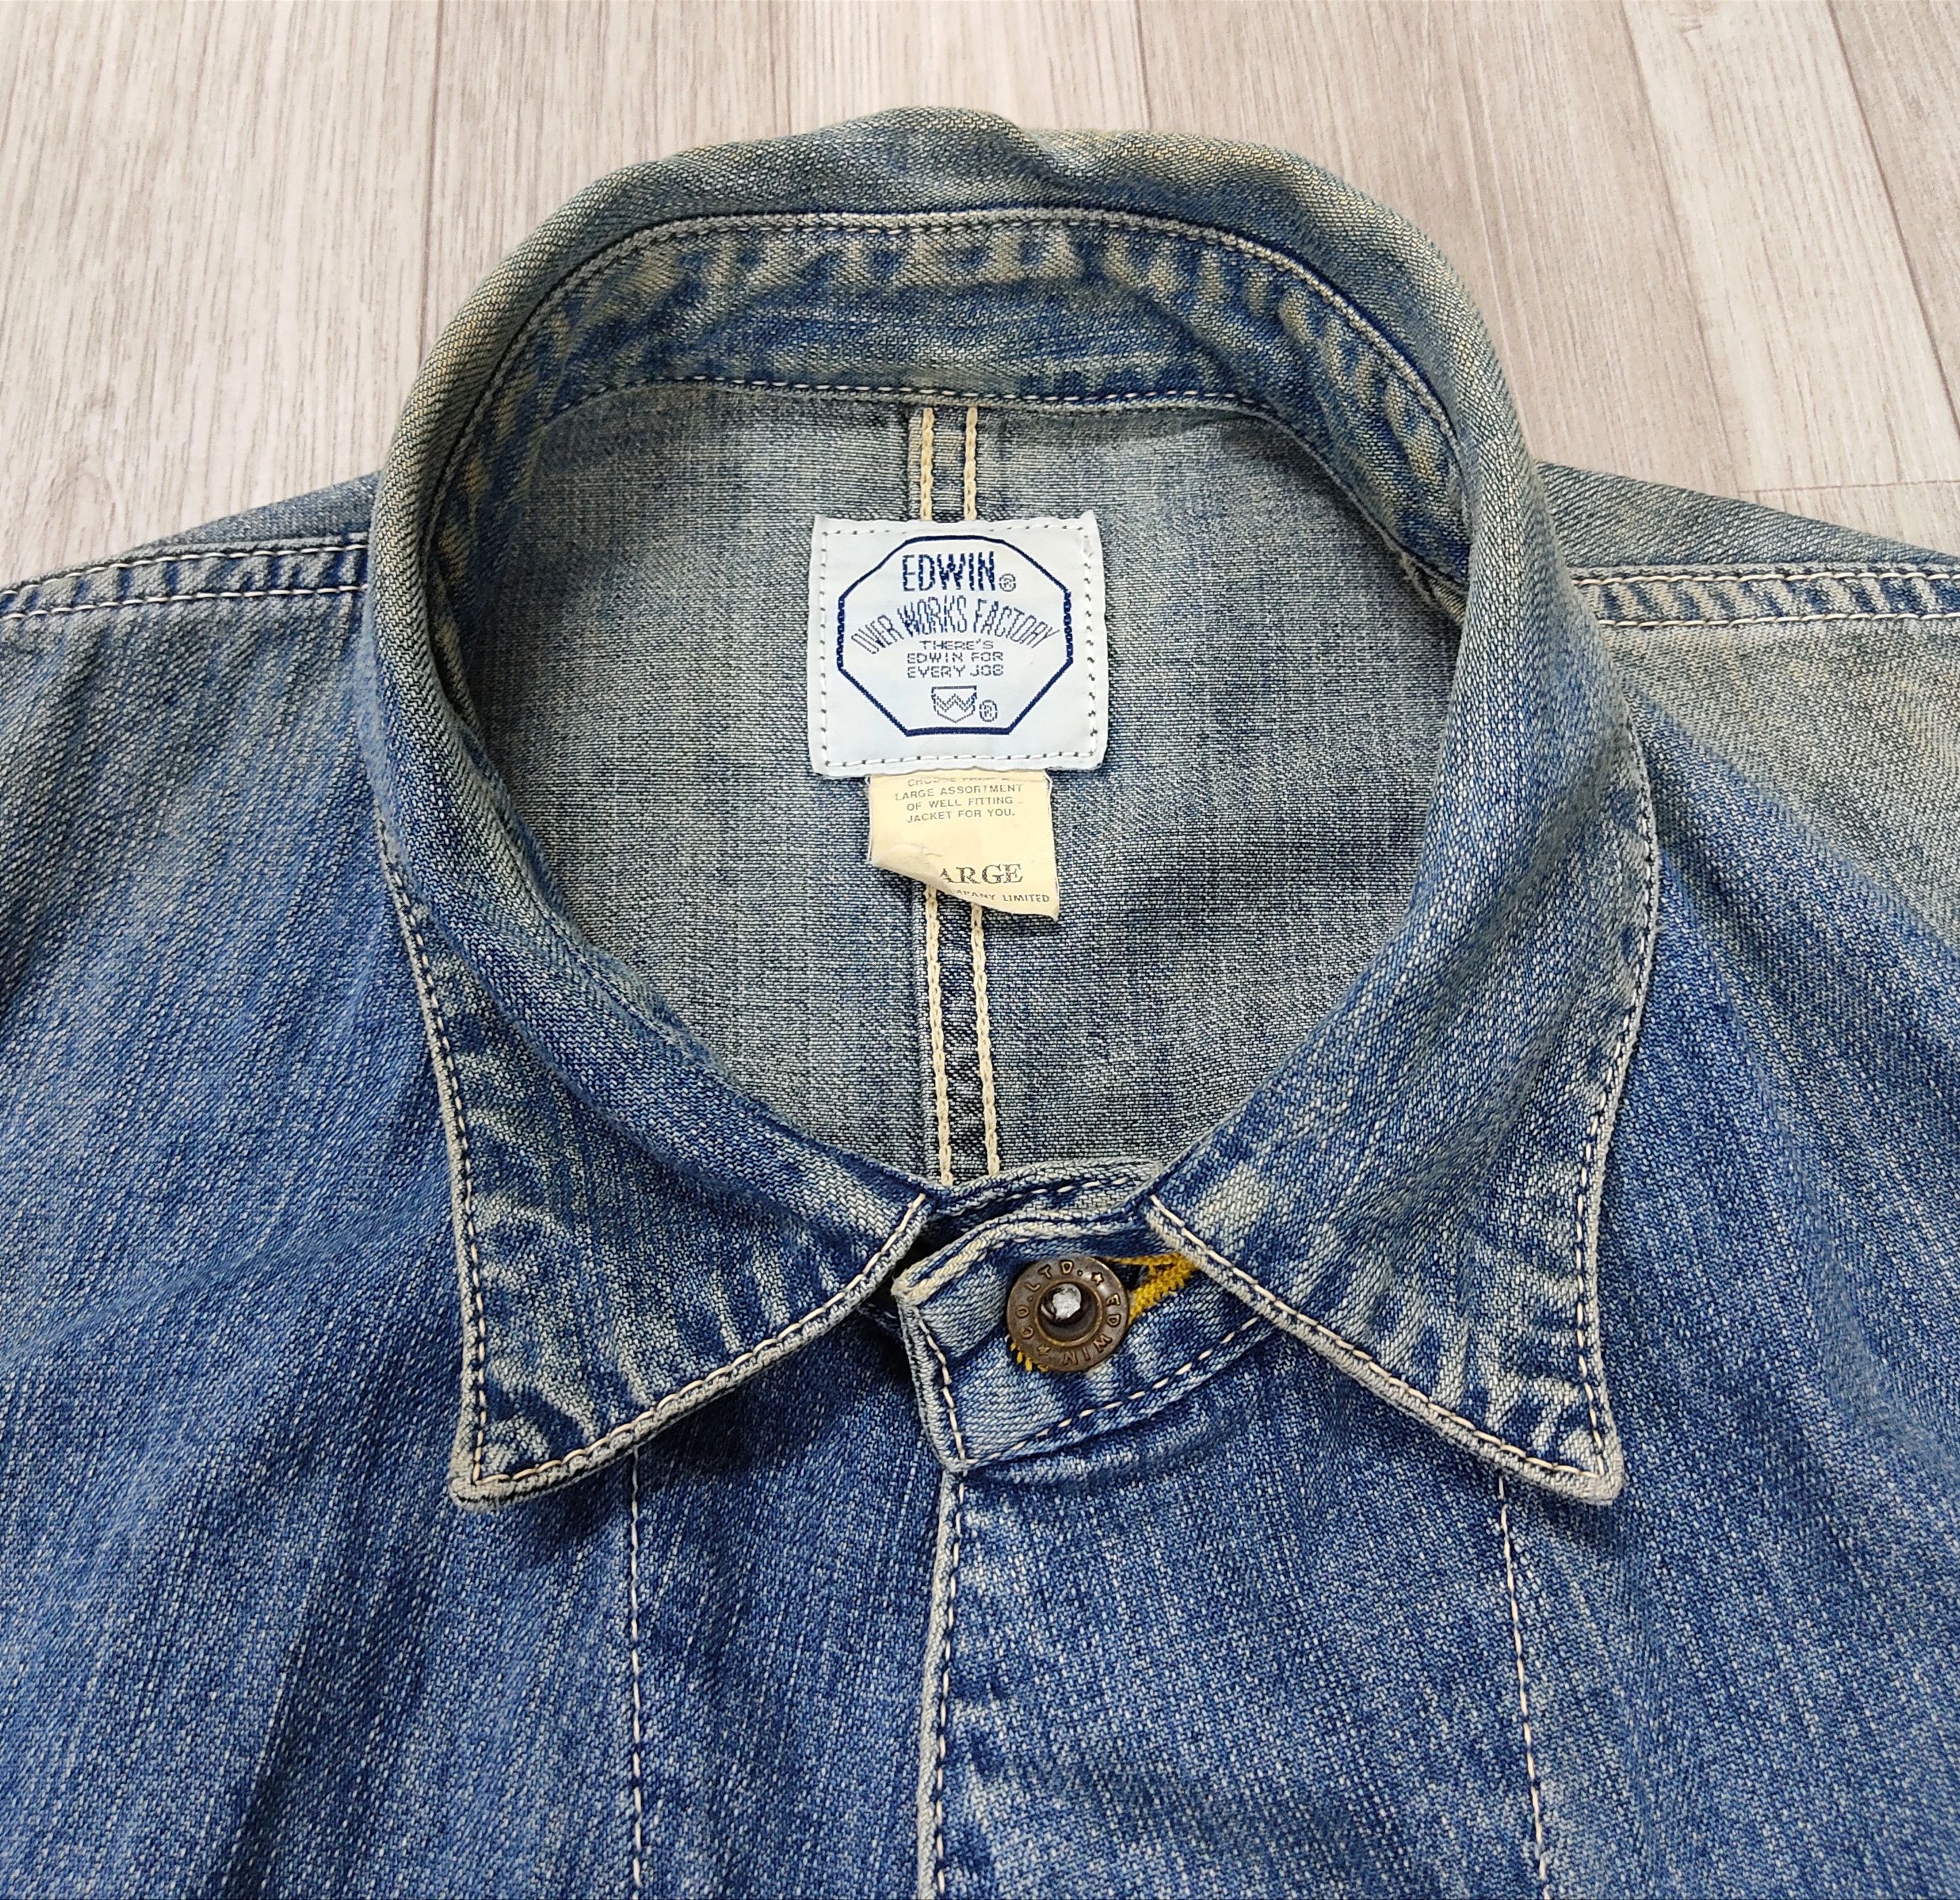 Vintage EDWIN Over Works Factory Chore Jacket - 8